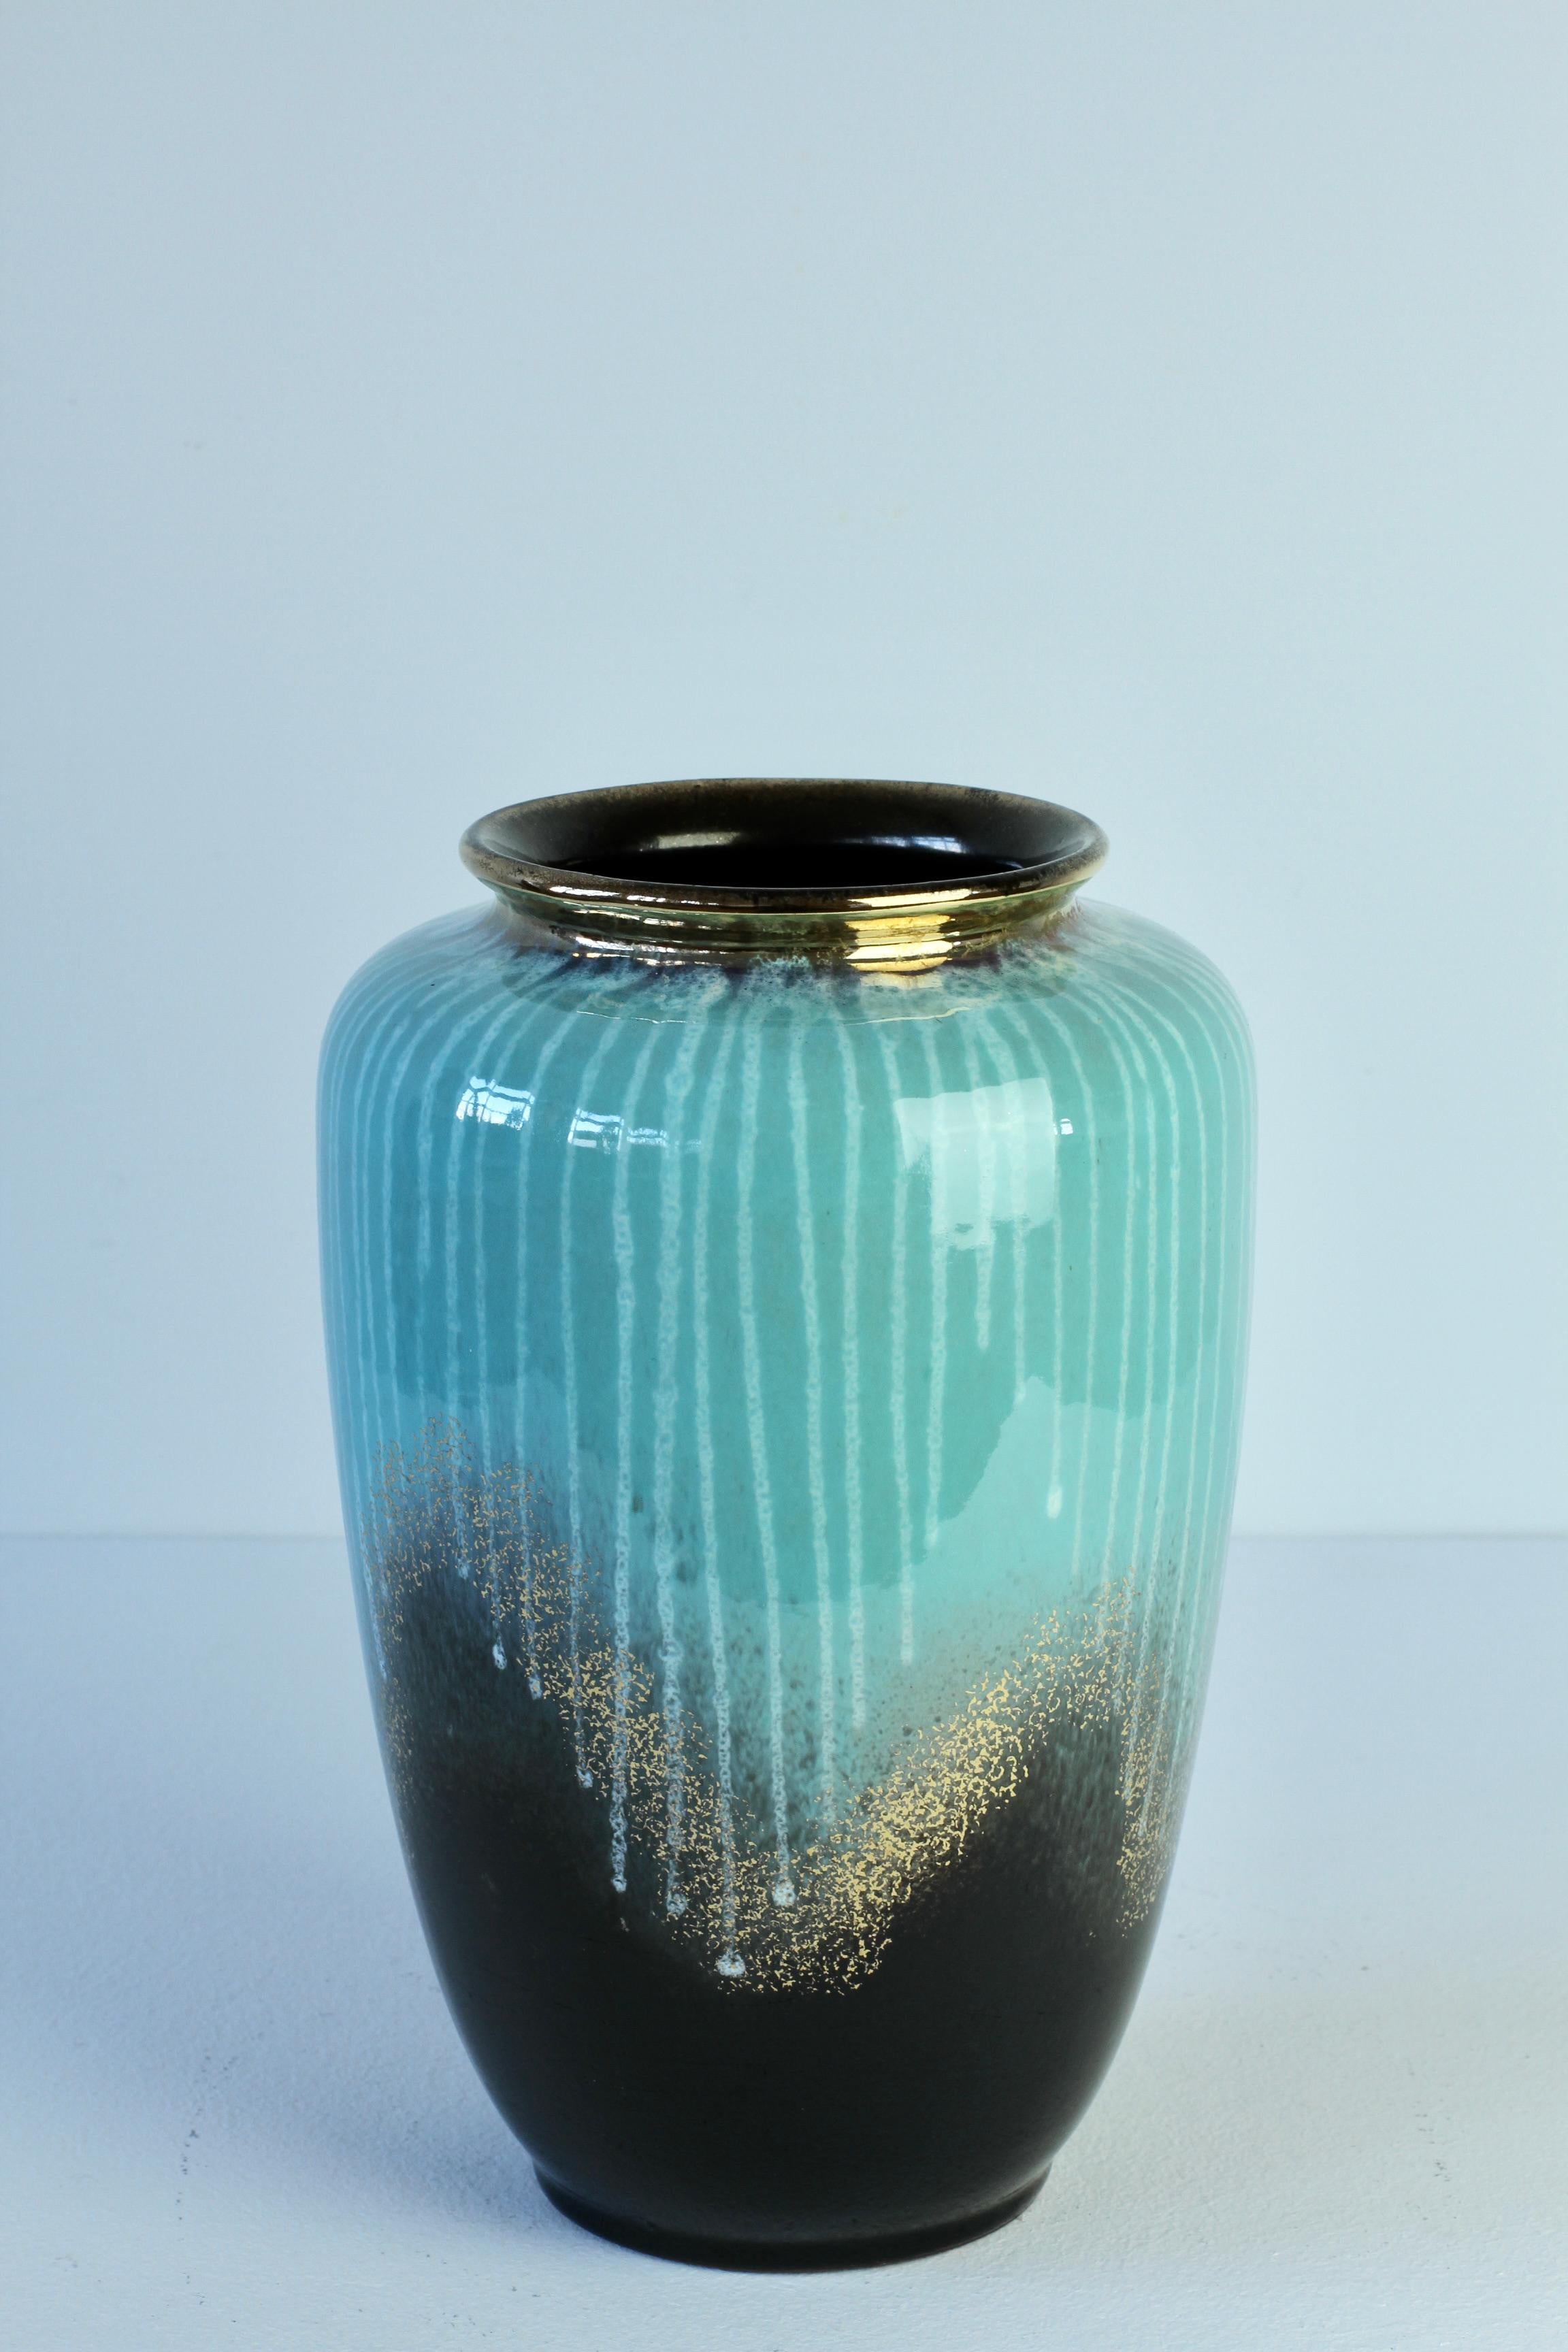 Beautiful vintage midcentury West German vessel or vase by Carstens Tonnieshof made post war circa 1950s with a turquoise blue and black glaze with gold details and white lines of drip glaze. Perfect to have a pair for over the mantlepiece of a